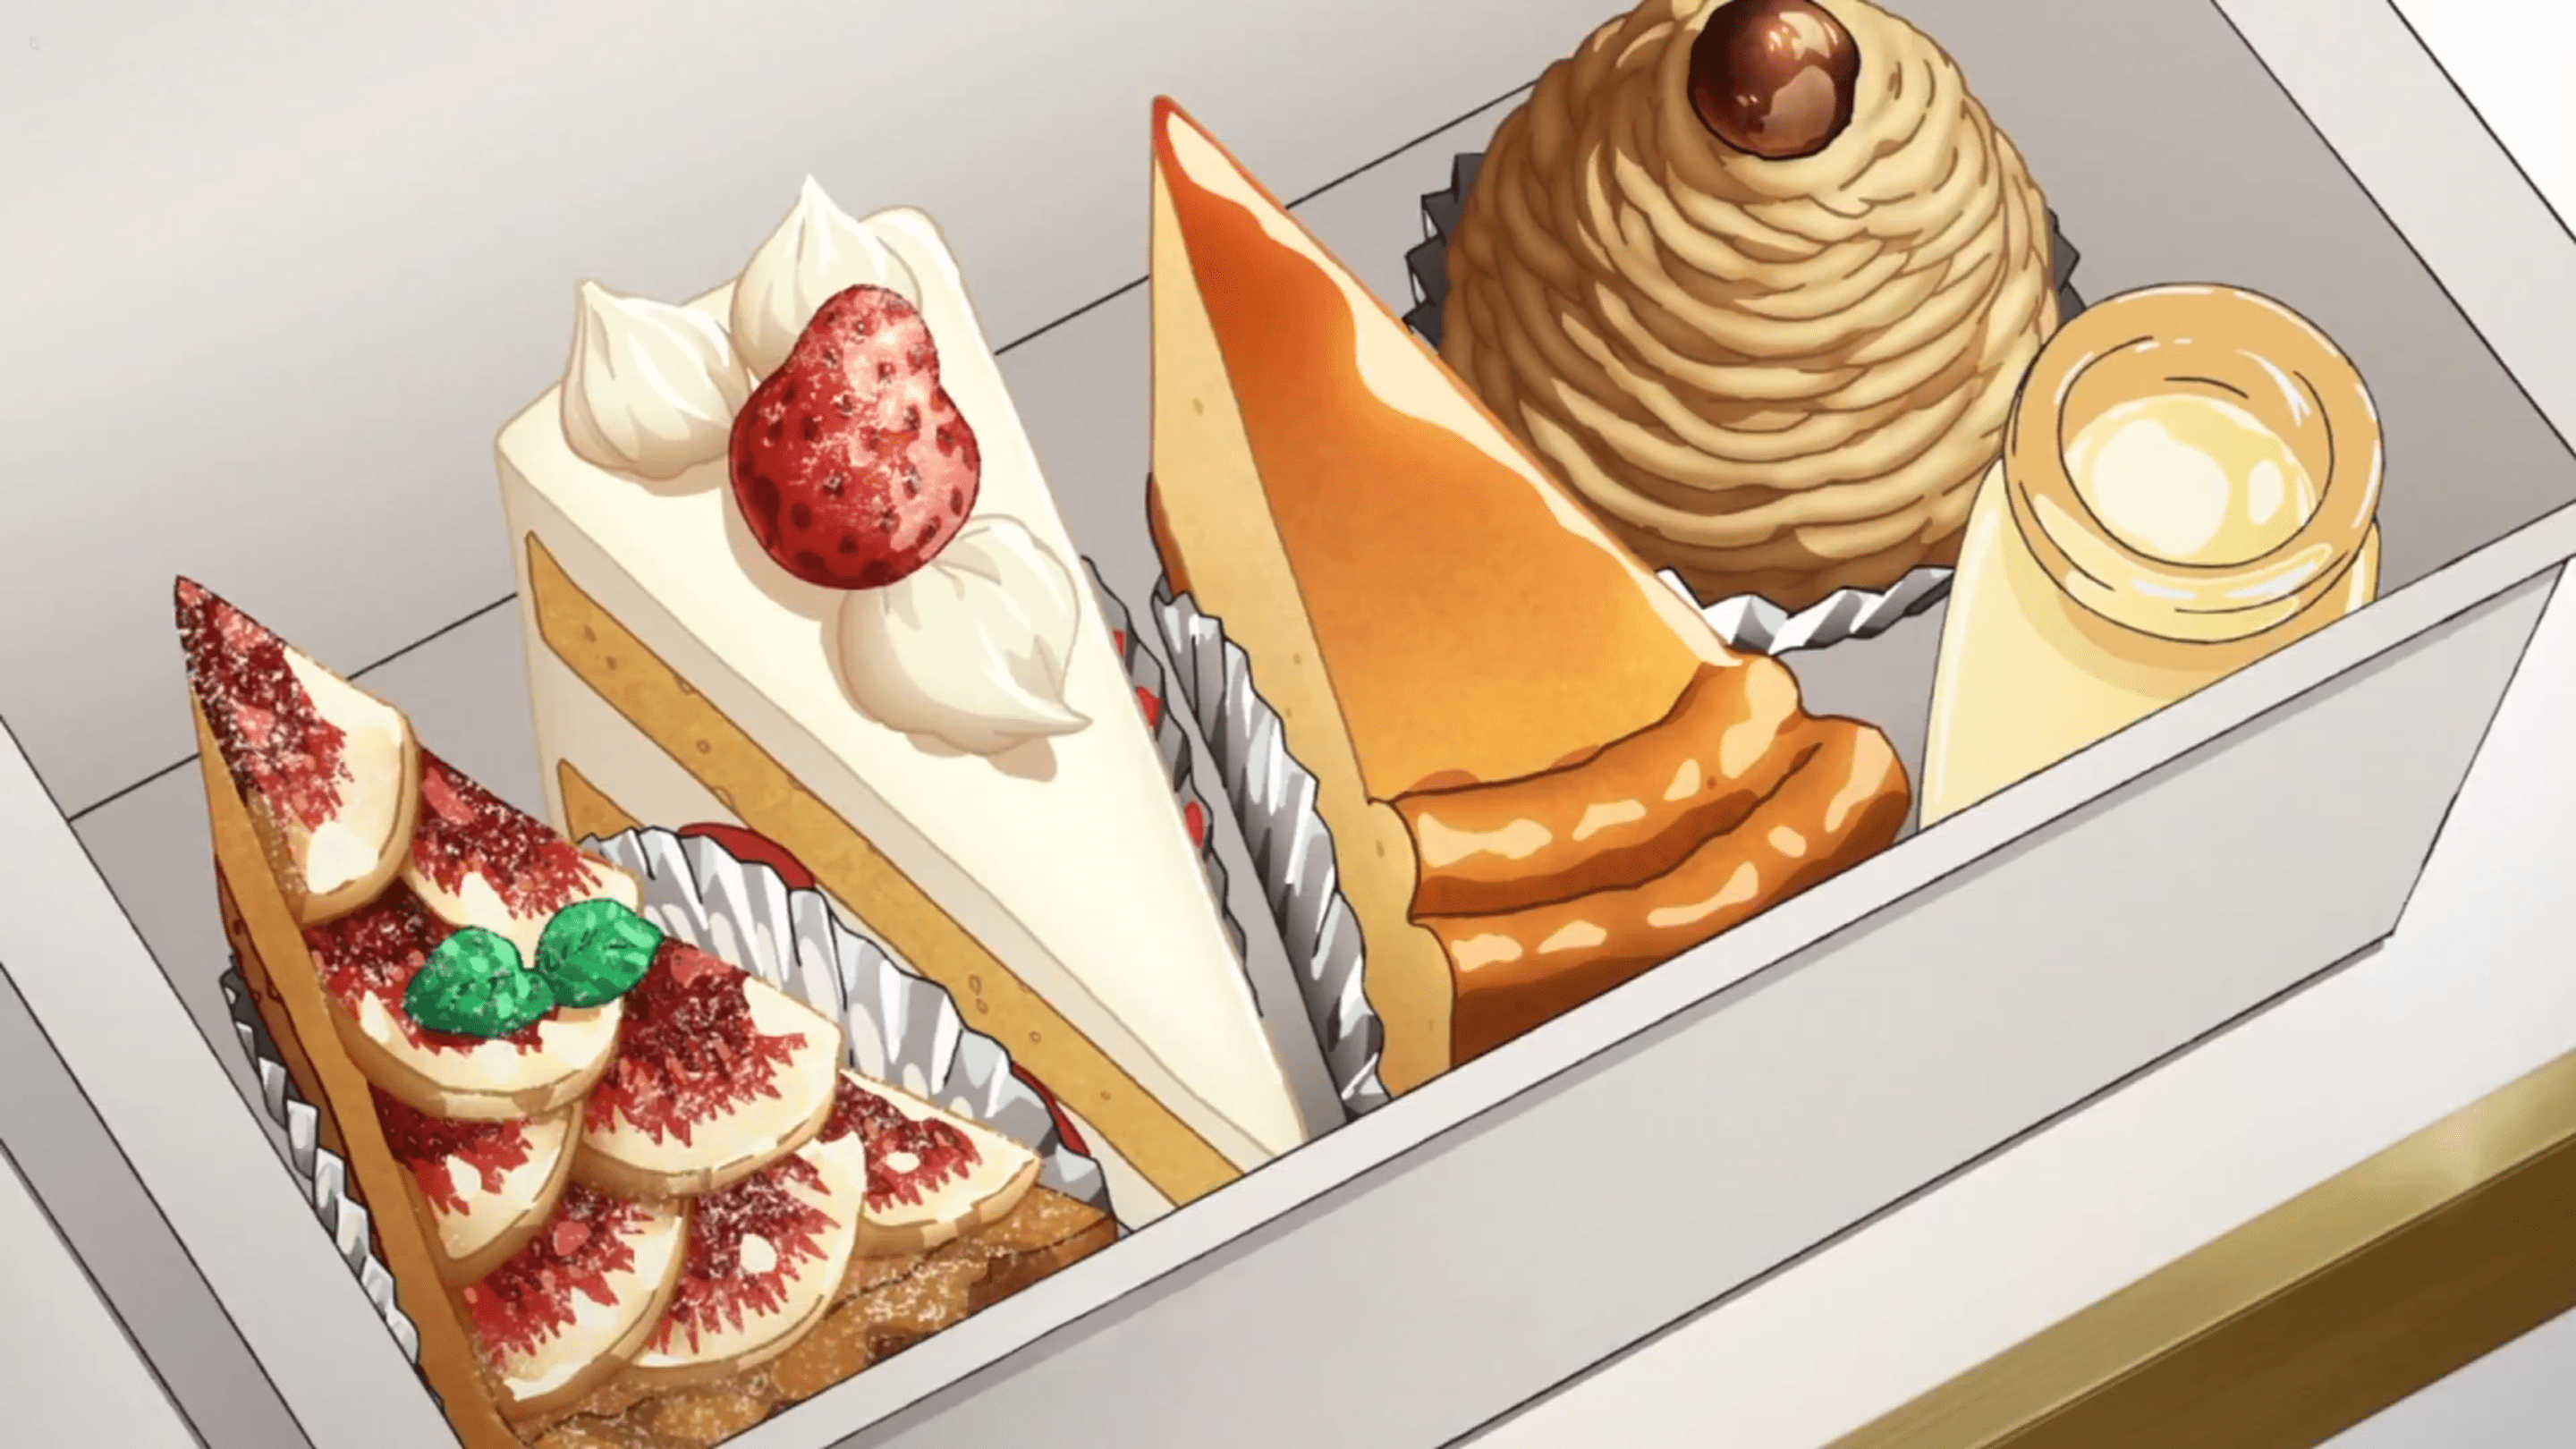 A box of various desserts, including a piece of cheesecake with strawberries on top, a slice of pie with whipped cream and a strawberry on top, a croissant, a cupcake with brown icing and a candle in it, and a cake with red sprinkles and a green mint leaf on top. - Cake, food